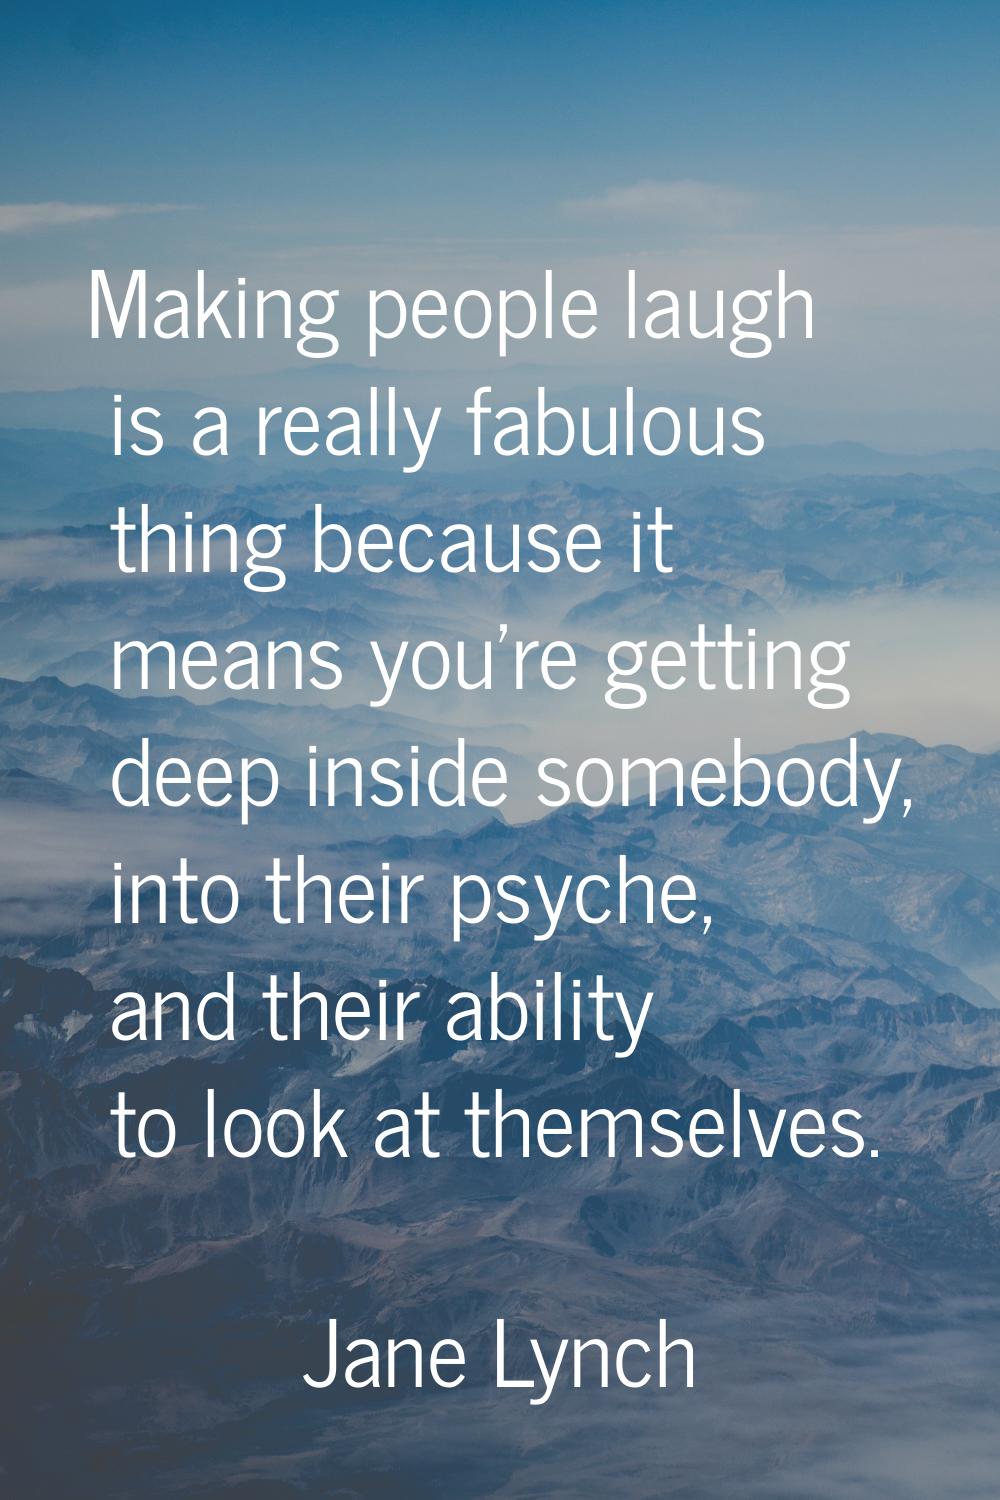 Making people laugh is a really fabulous thing because it means you're getting deep inside somebody